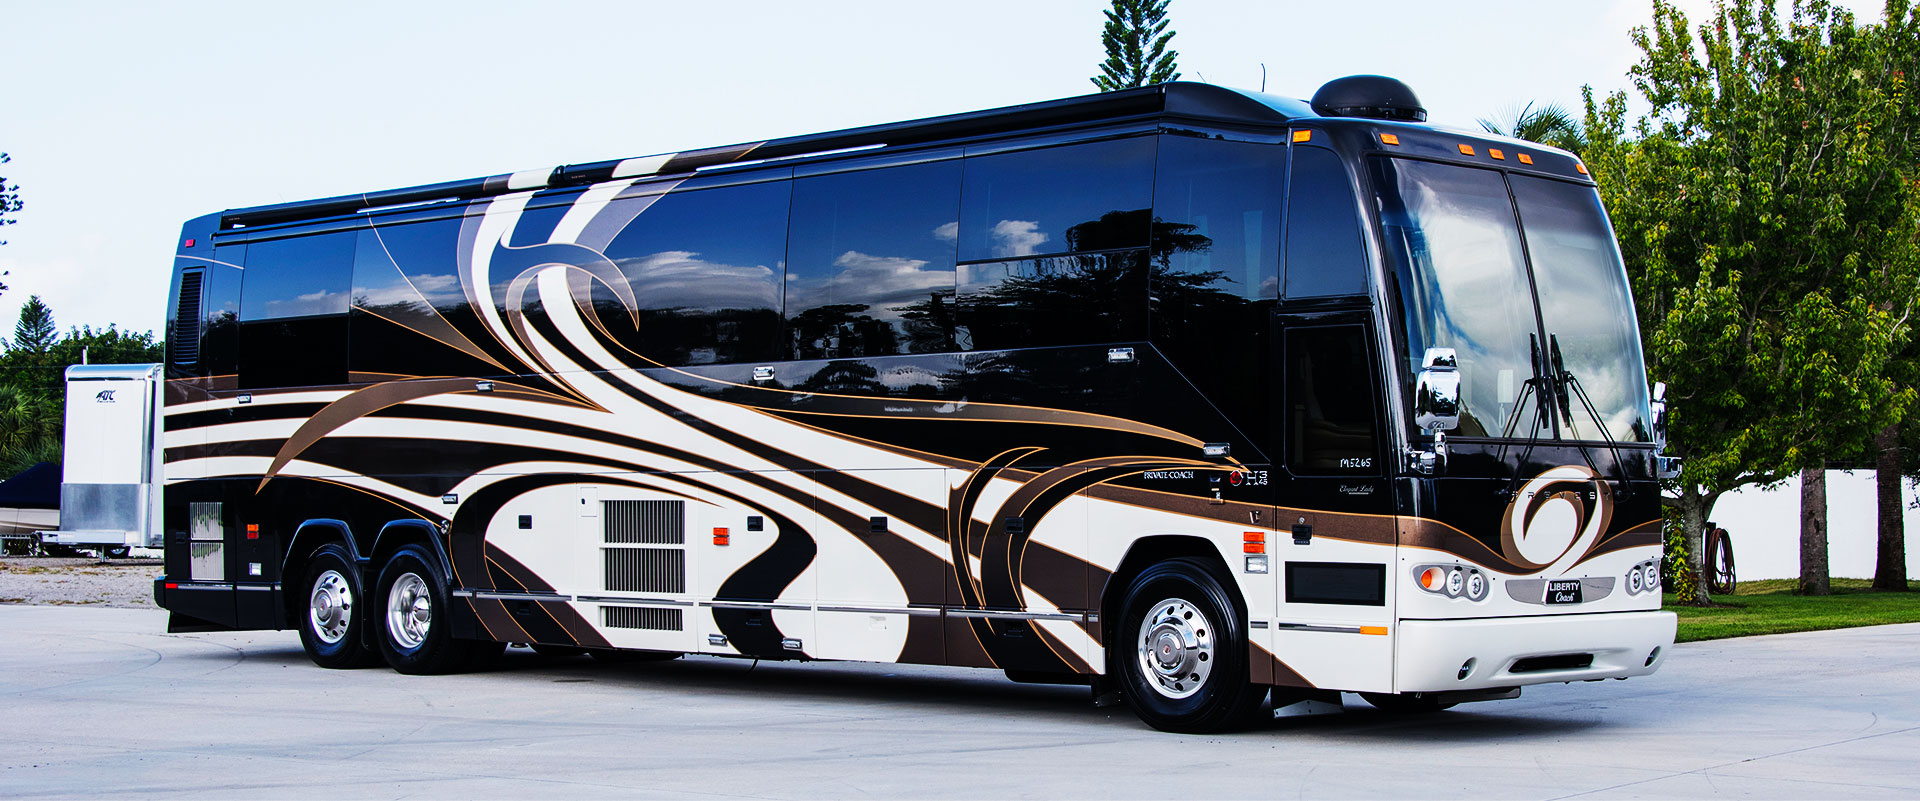 Brown and White Motorcoach parked in lot